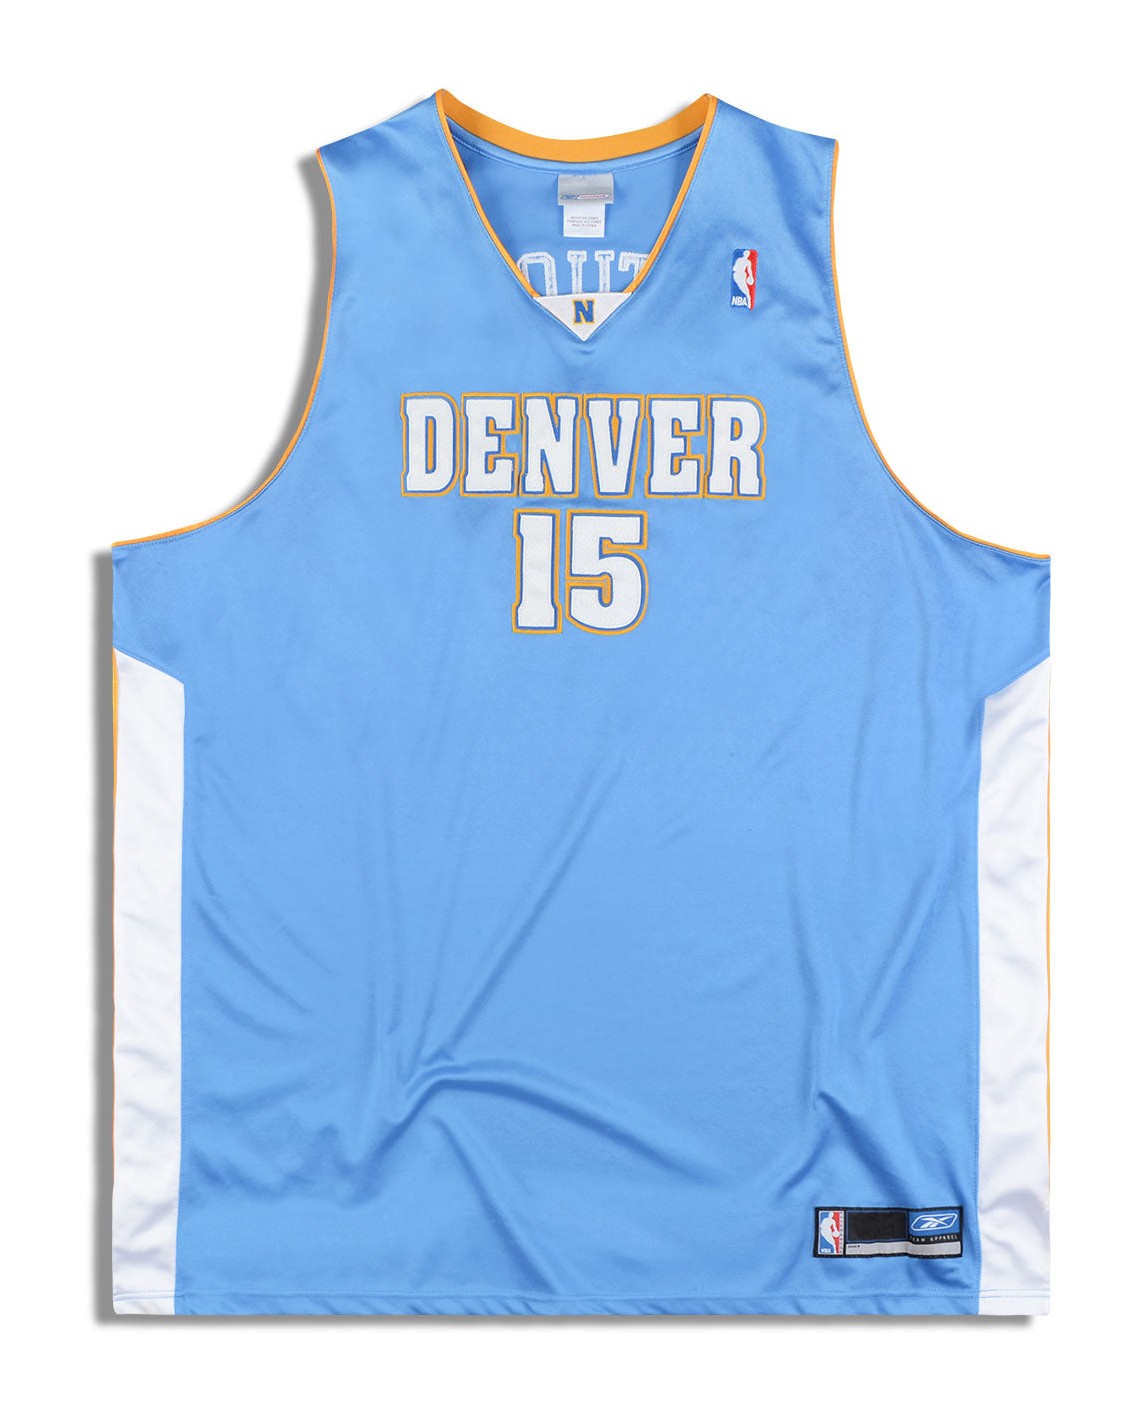 2003-04 DENVER NUGGETS CAMBY #23 NIKE SWINGMAN JERSEY (AWAY) L - Classic  American Sports